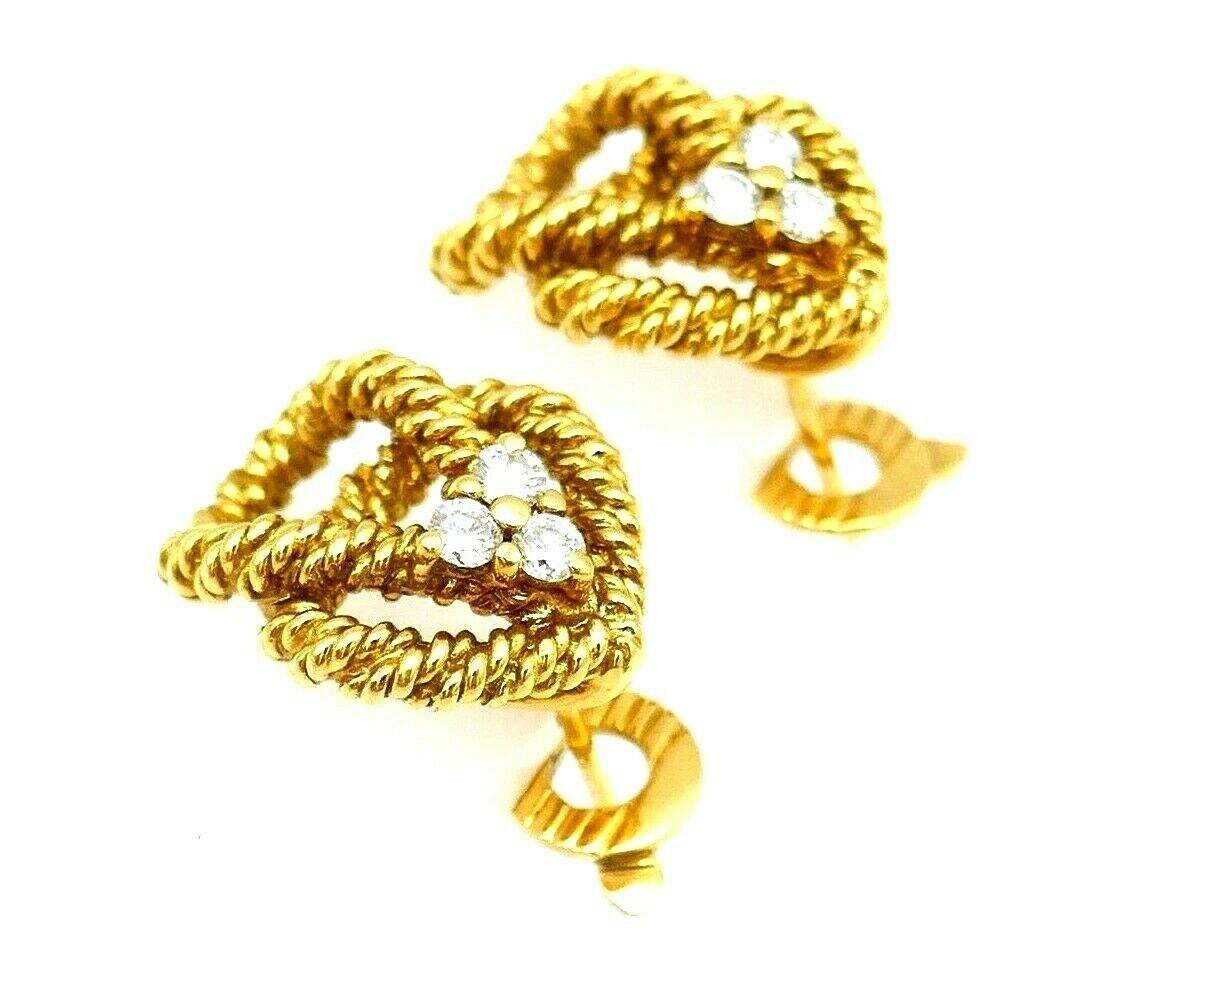 A pair of beautiful cable twist earrings by Boucheron. Made of 18k braided yellow gold featuring diamond. Stamped with Boucheron maker's mark, a French mark, a serial number and a hallmark for 18k gold.
Measurements: 3/4